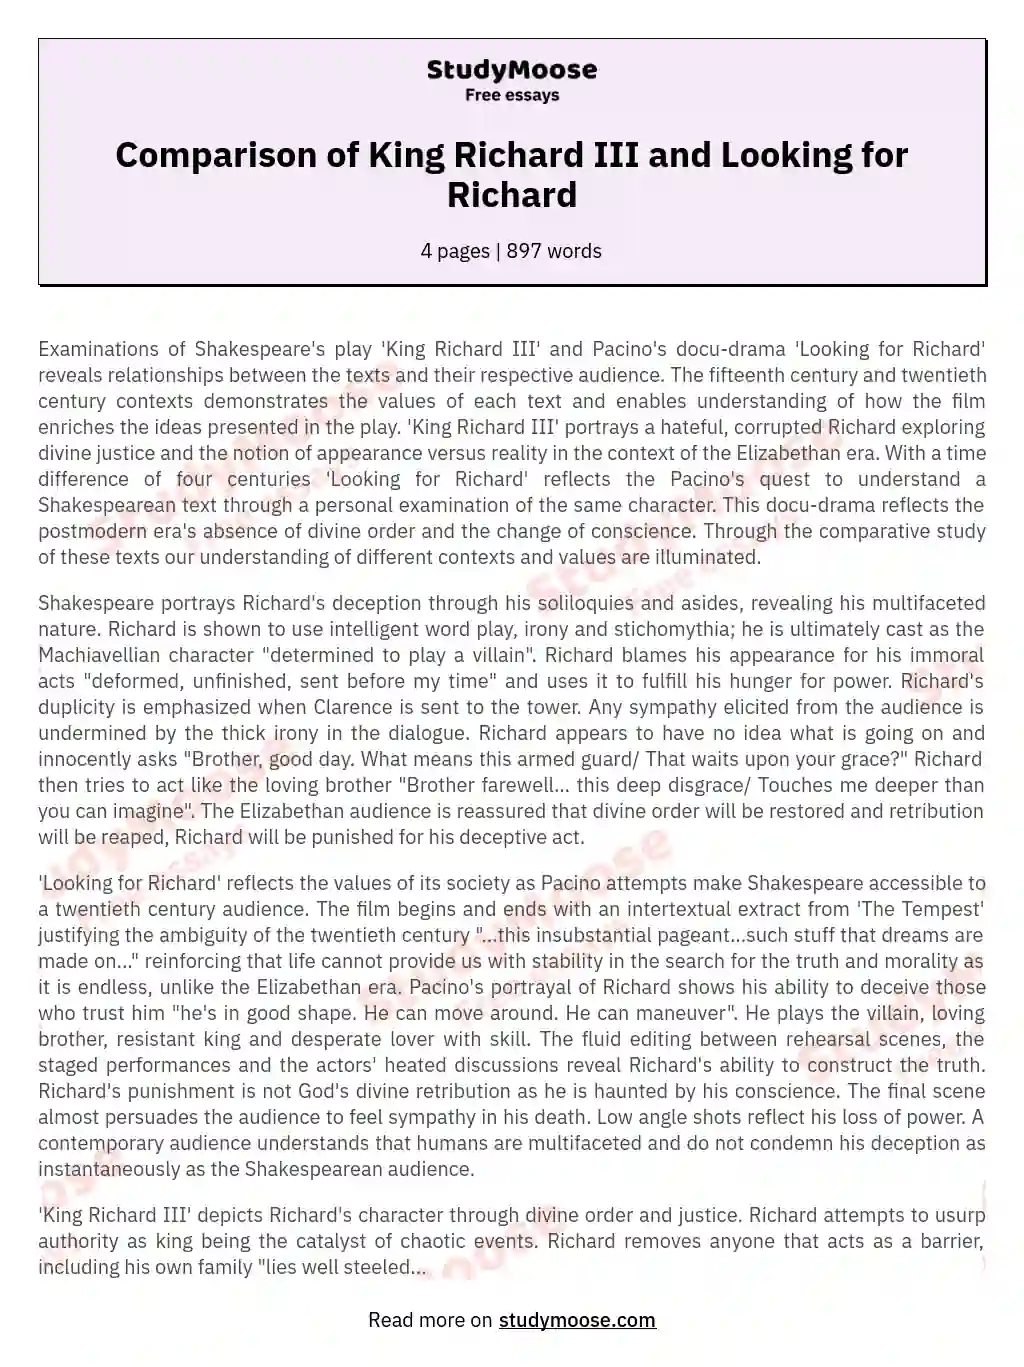 Comparison of King Richard III and Looking for Richard essay